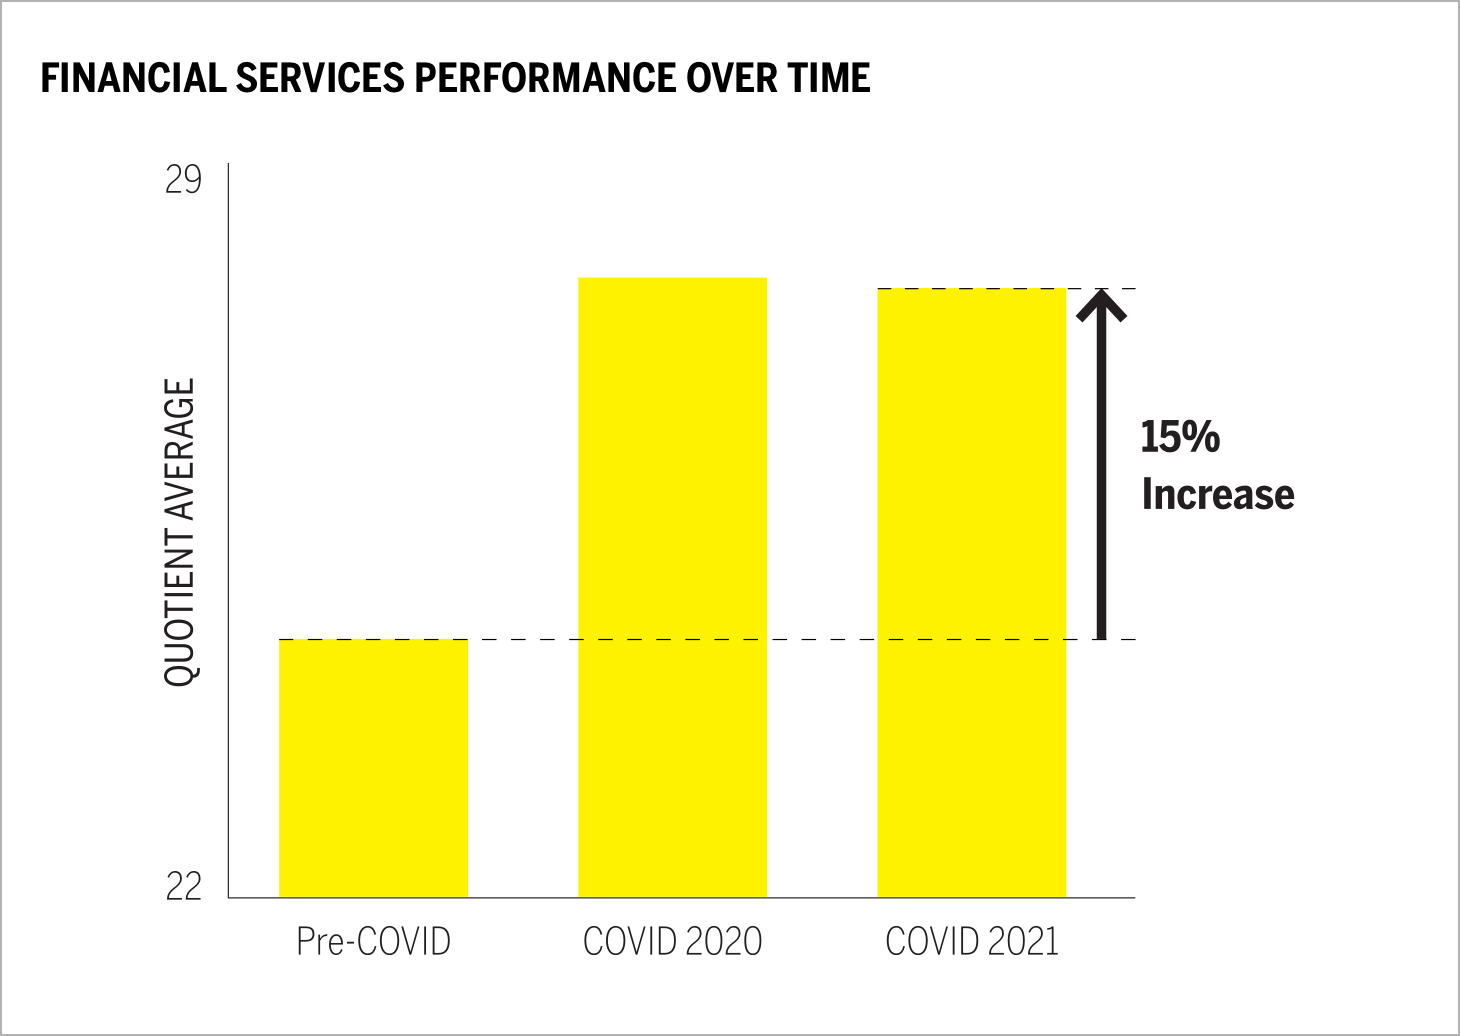 FINANCIAL SERVICES PERFORMANCE OVER TIME chart